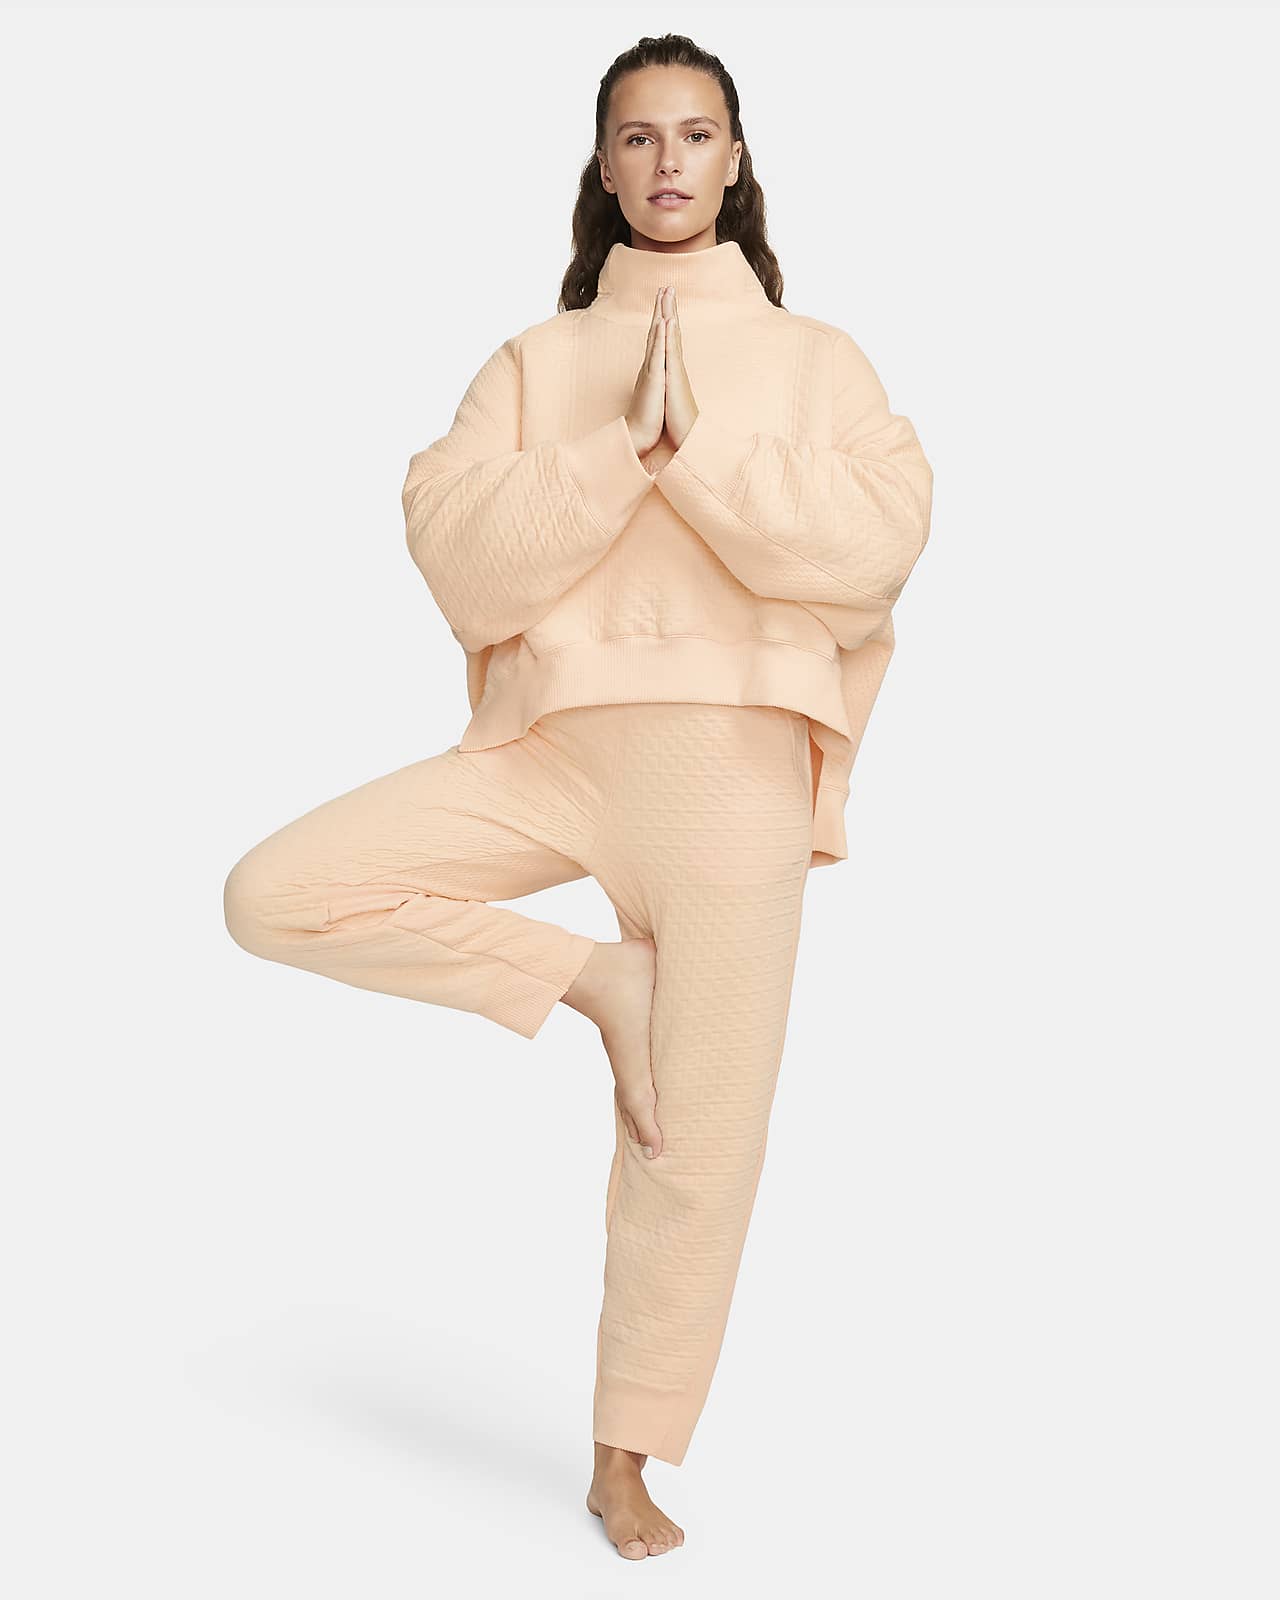 https://static.nike.com/a/images/t_PDP_1280_v1/f_auto,q_auto:eco/a0d34098-e616-4678-94fd-0fc0f368f0e7/yoga-oversized-high-waisted-trousers-hcpMNS.png